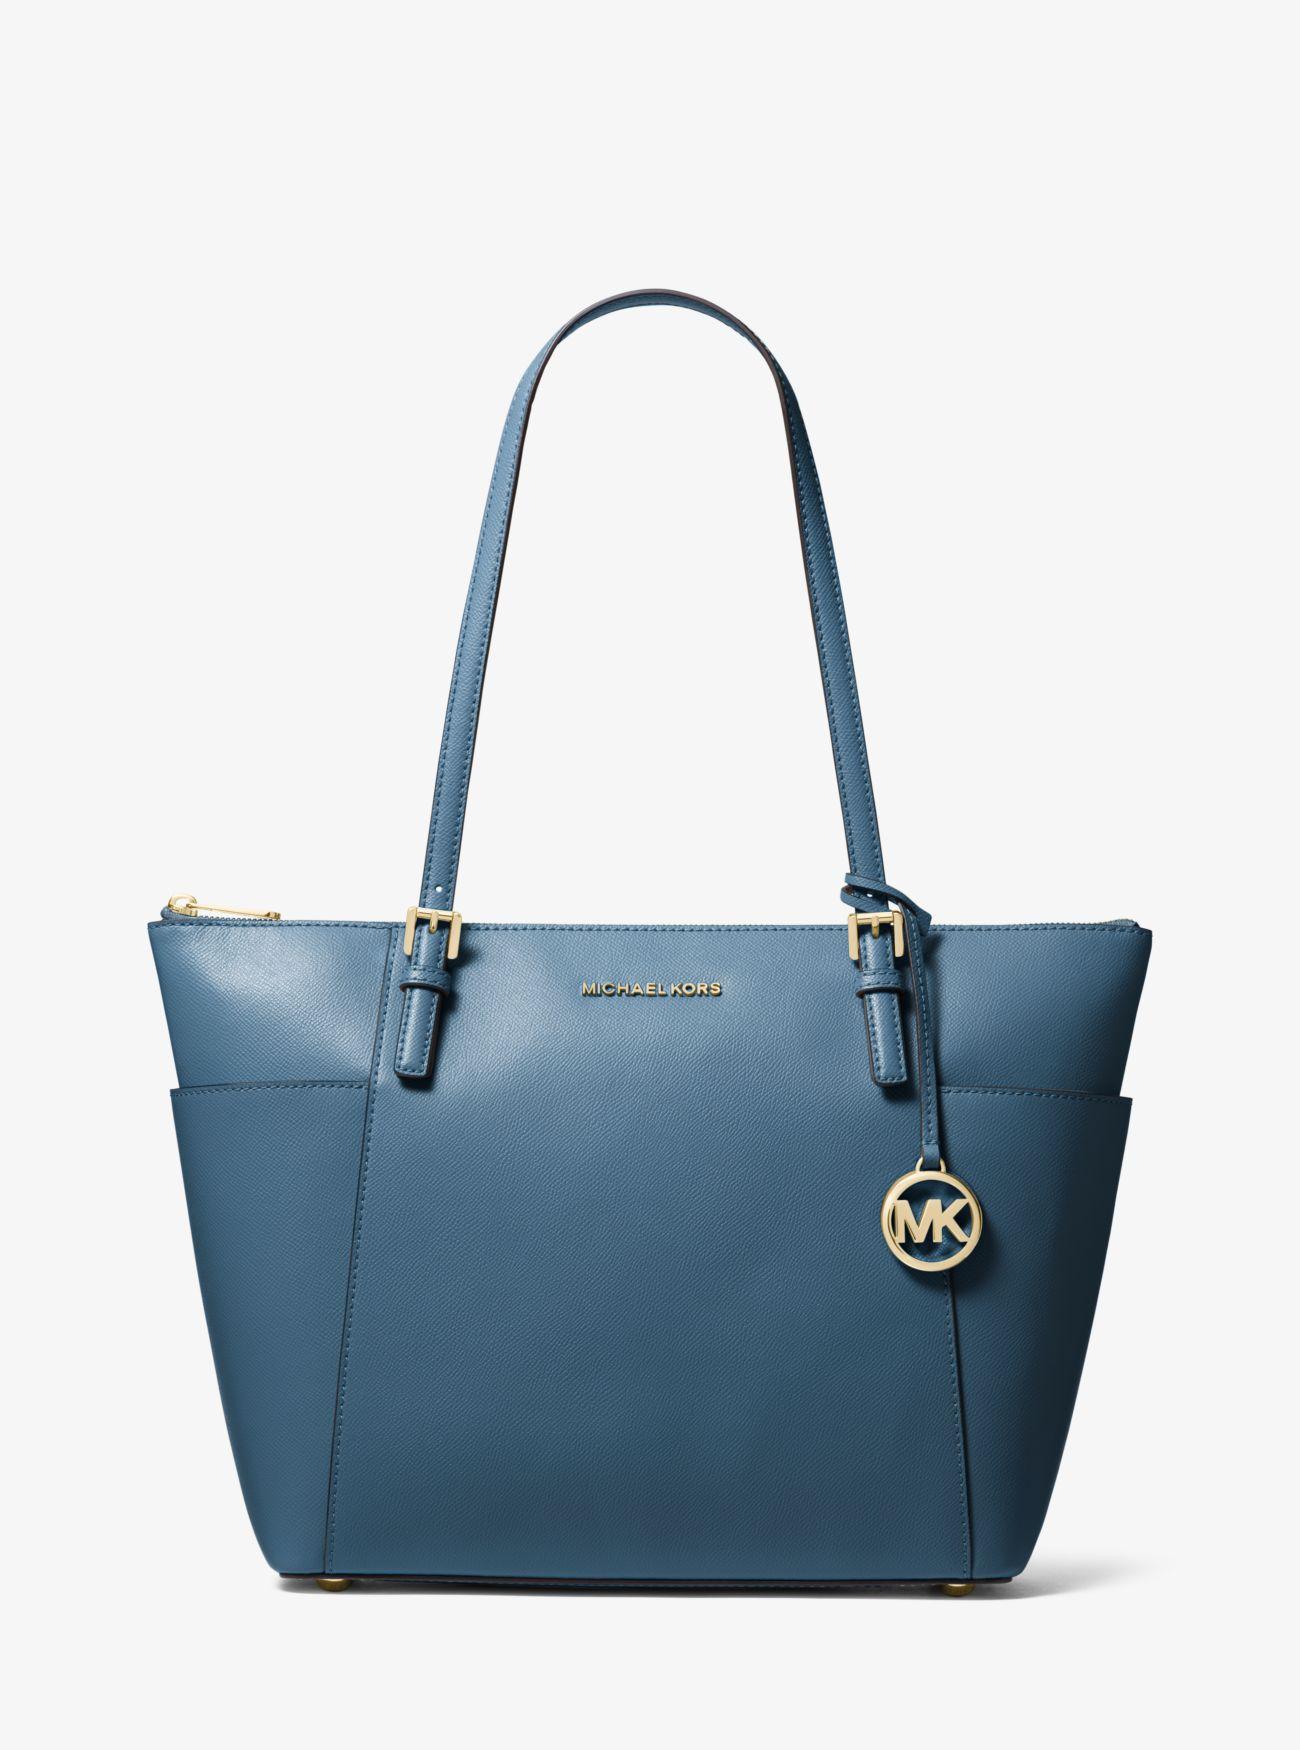 MICHAEL Michael Kors Jet Set Large Saffiano Leather Top-zip Tote Bag in Blue - Lyst